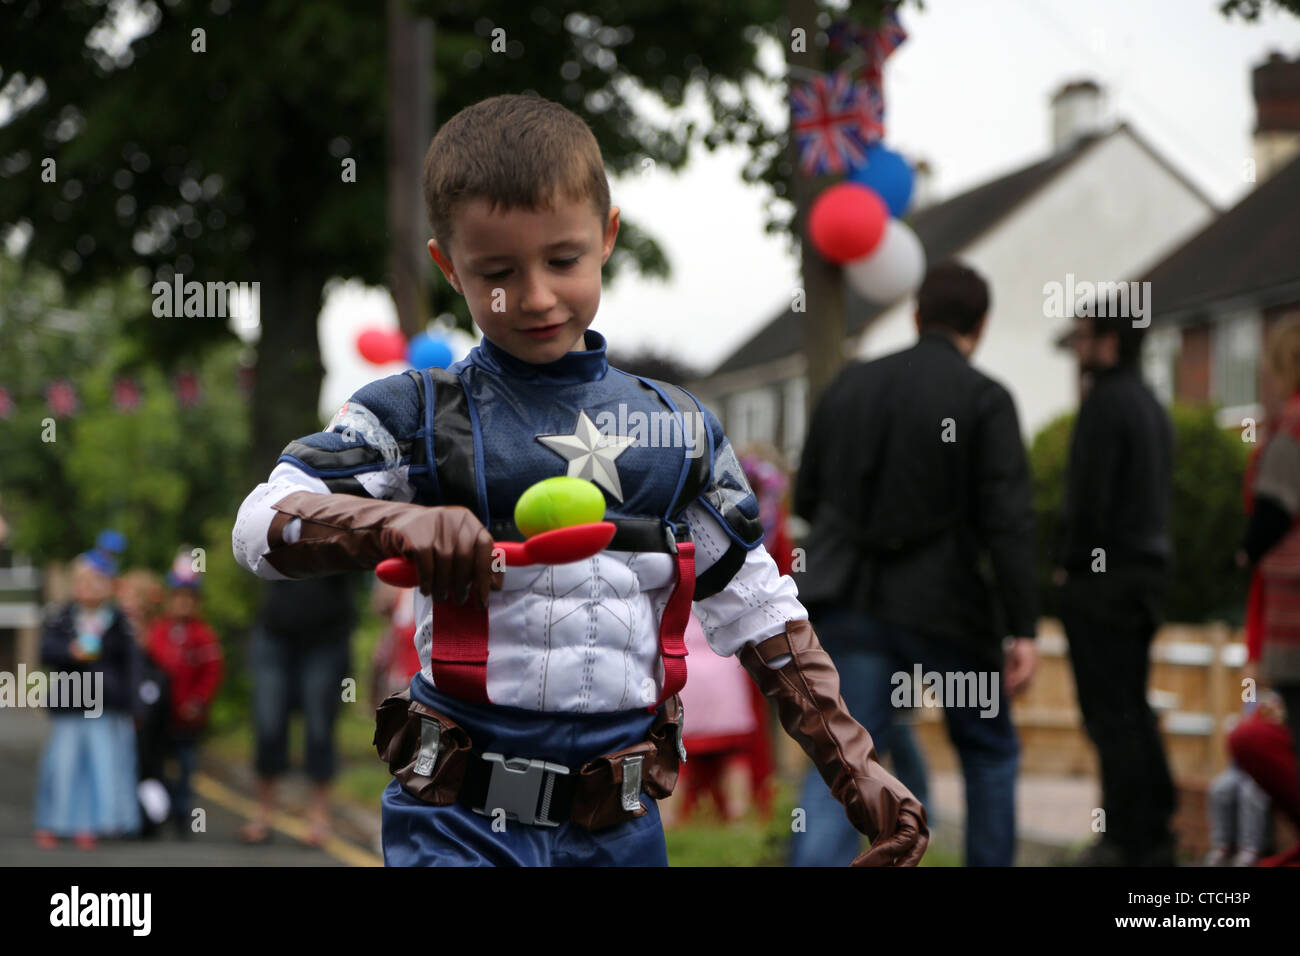 Boy  Egg and Spoon Race At A Street Party Wearing Captain America Fancy Dress During Queen's Diamond Jubilee Surrey England Stock Photo